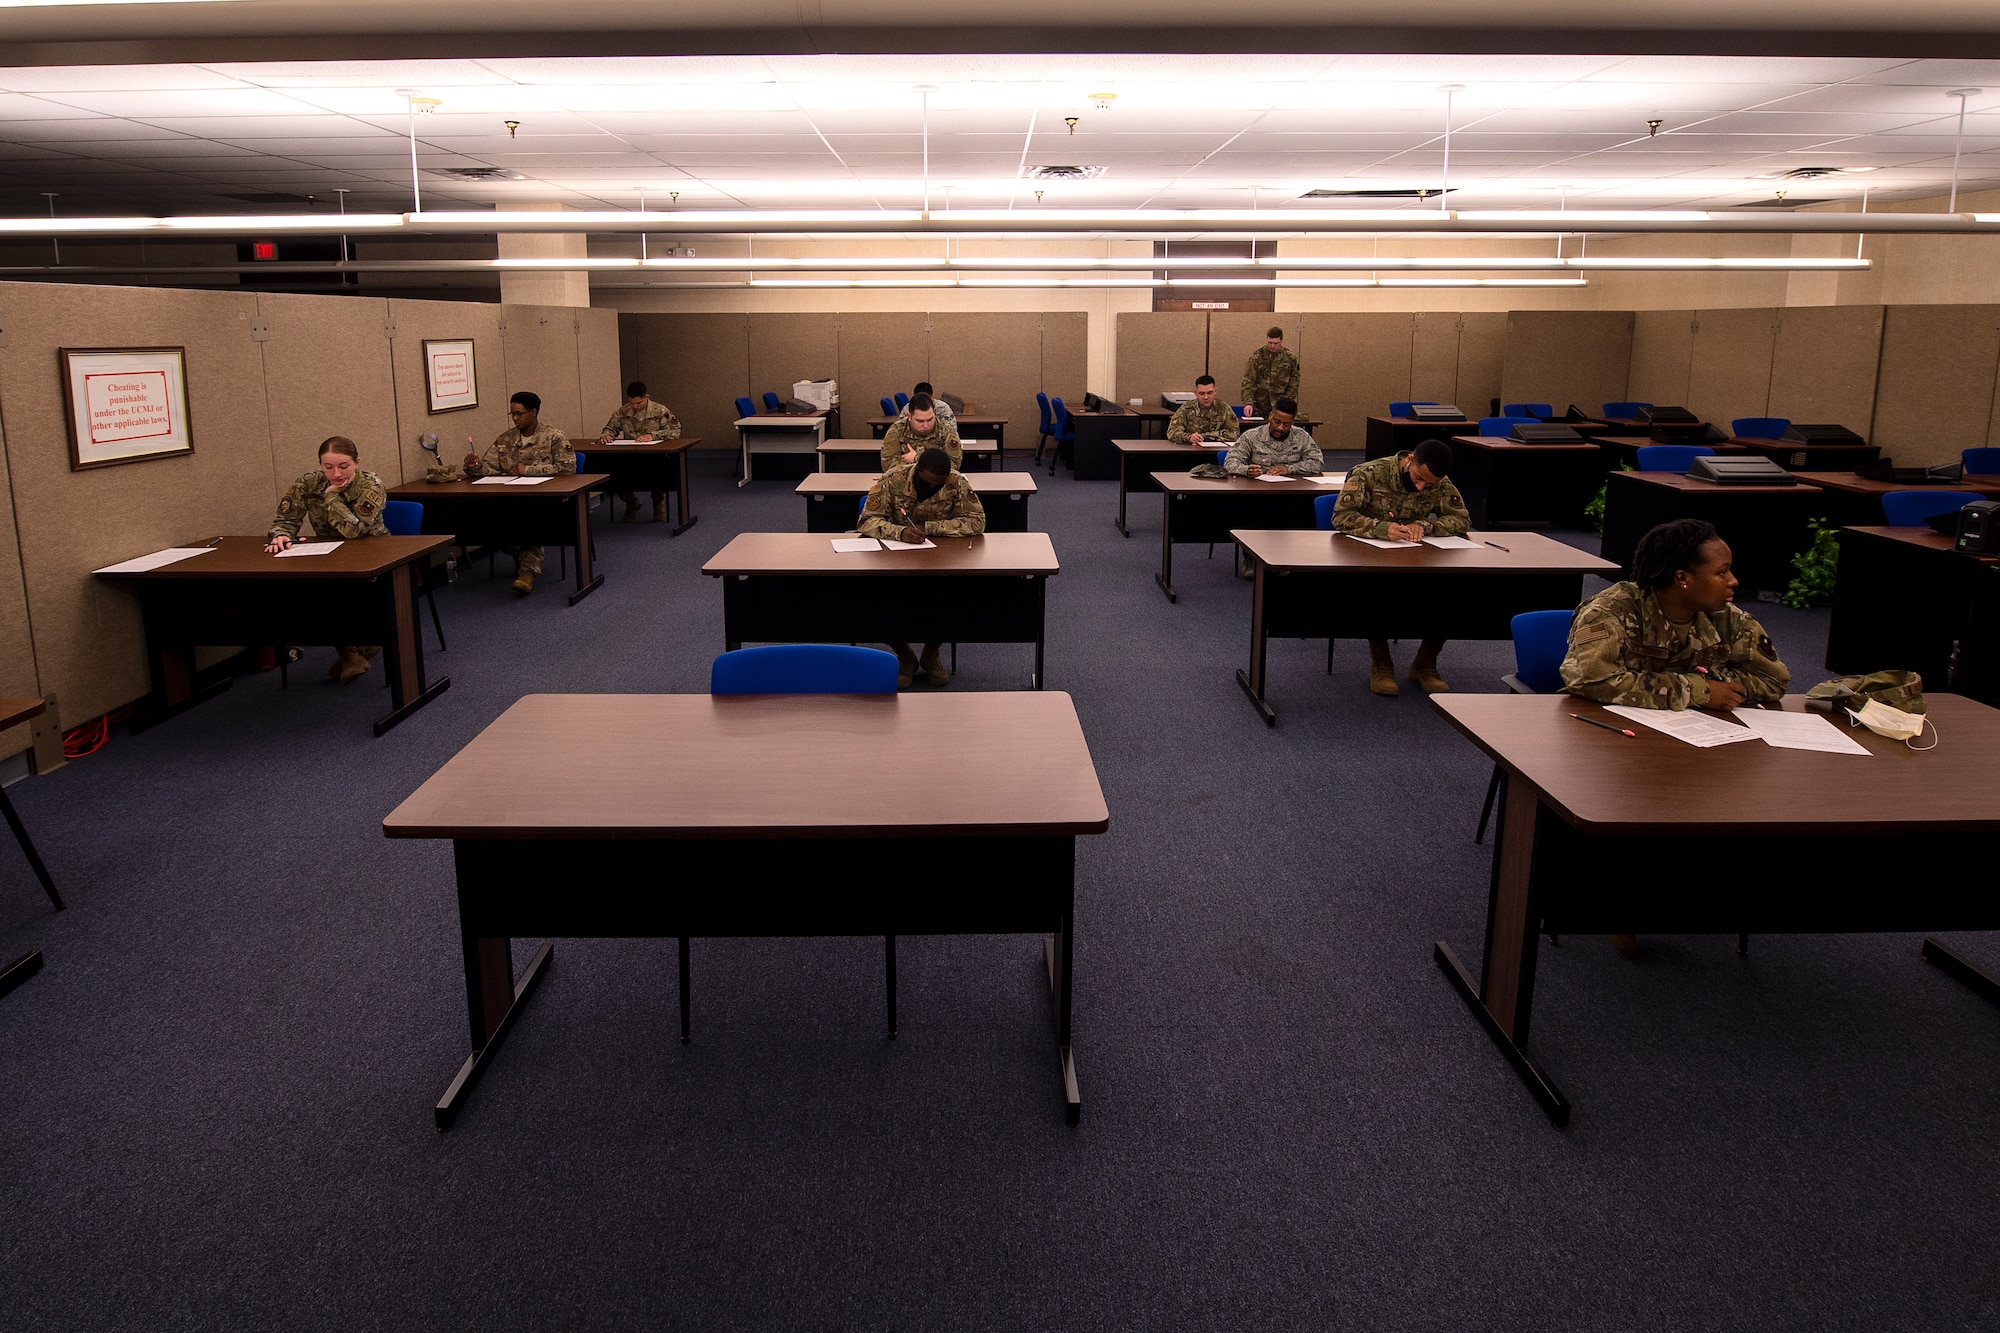 U.S. Air Force members fill out their Weighted Airman Promotion System testing sheets, May 20, 2020 at Altus Air Force Base, Oklahoma.